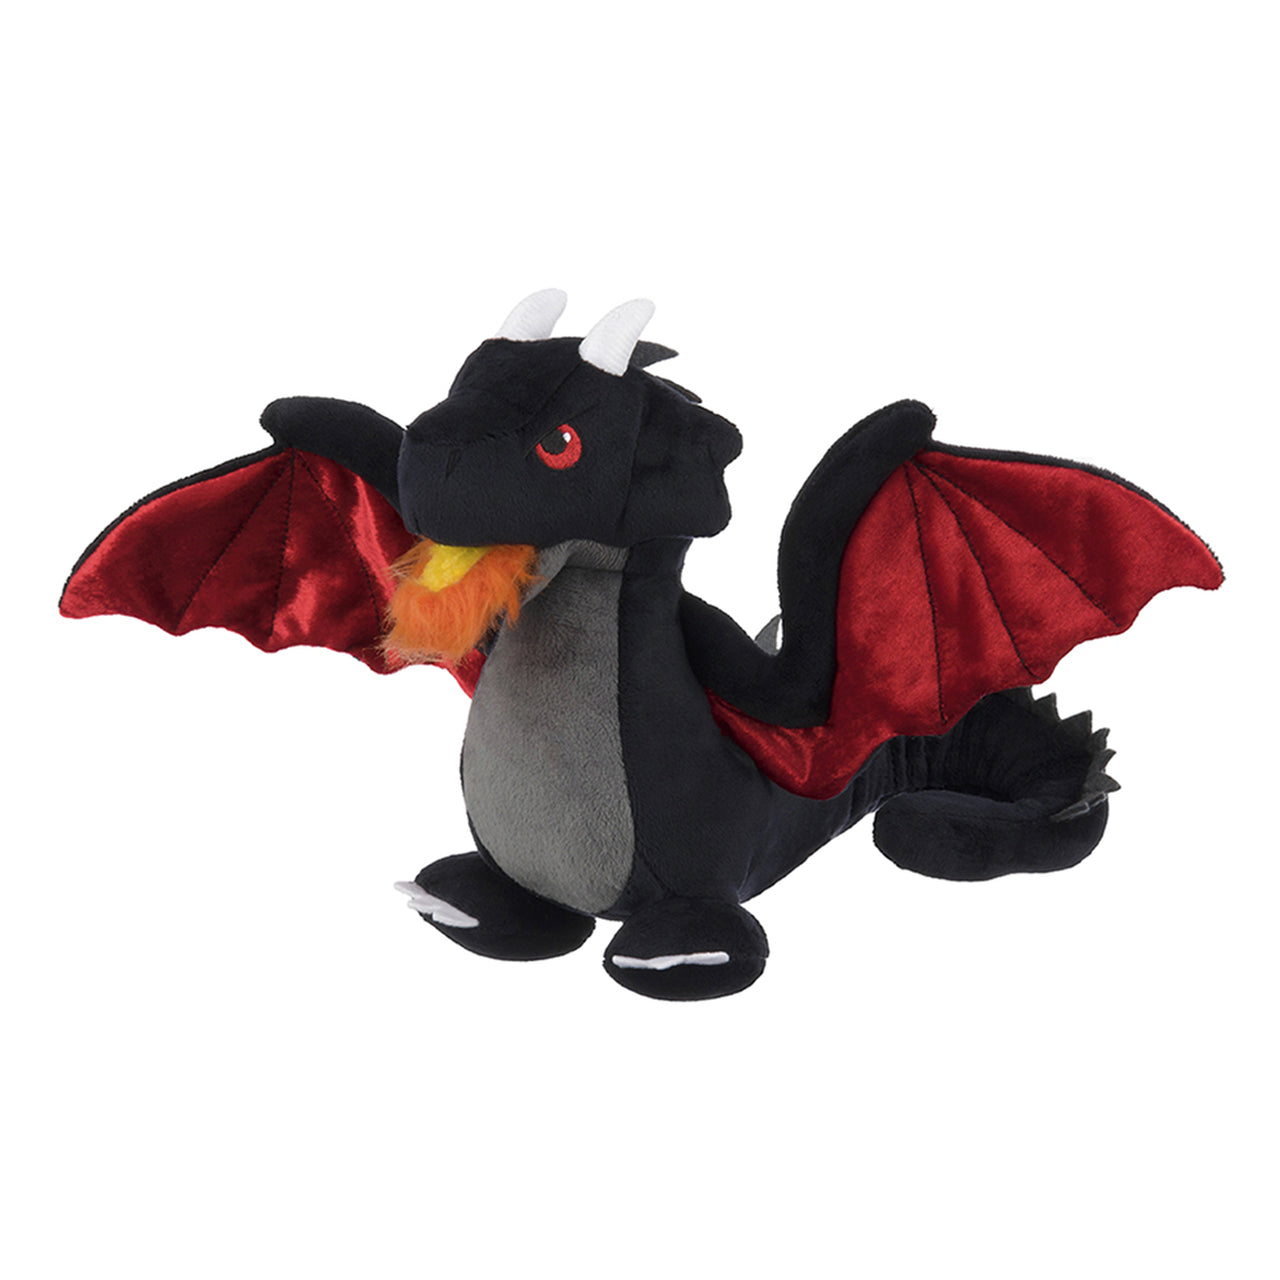 PLAY Mythical Darby the Dragon